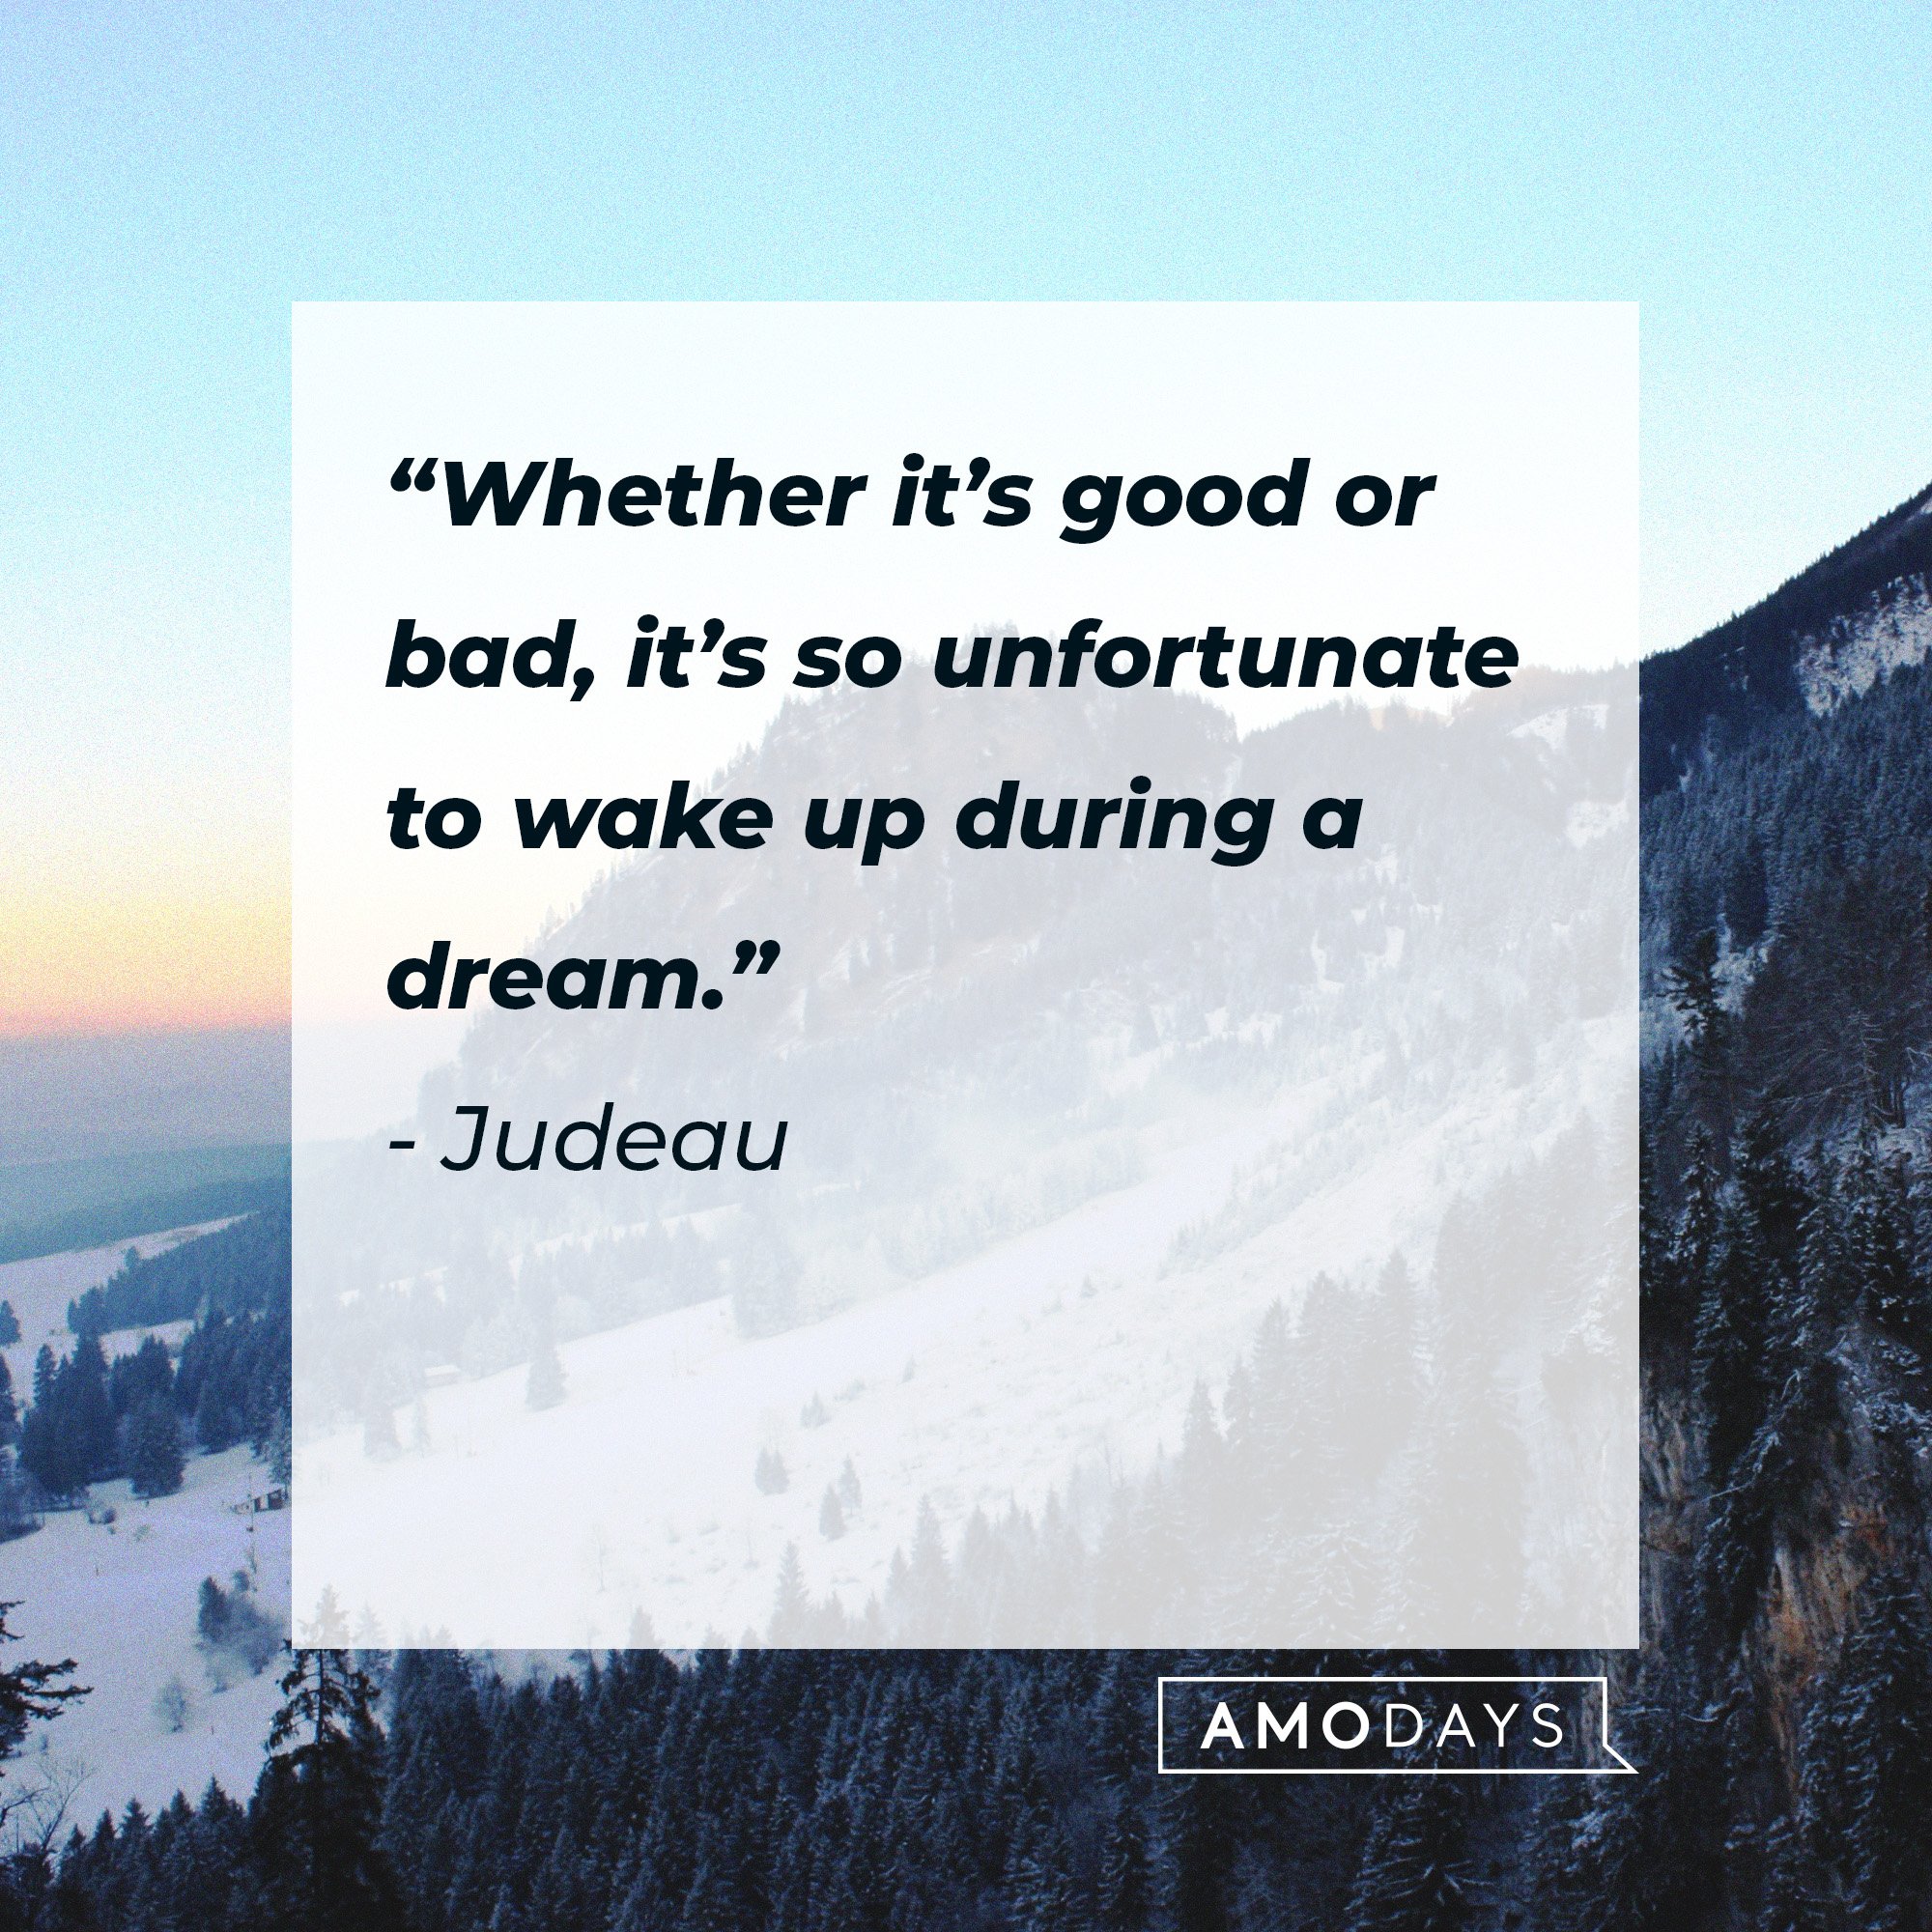 Judeau's quote: “Whether it’s good or bad, it’s so unfortunate to wake up during a dream.” | Image: AmoDays